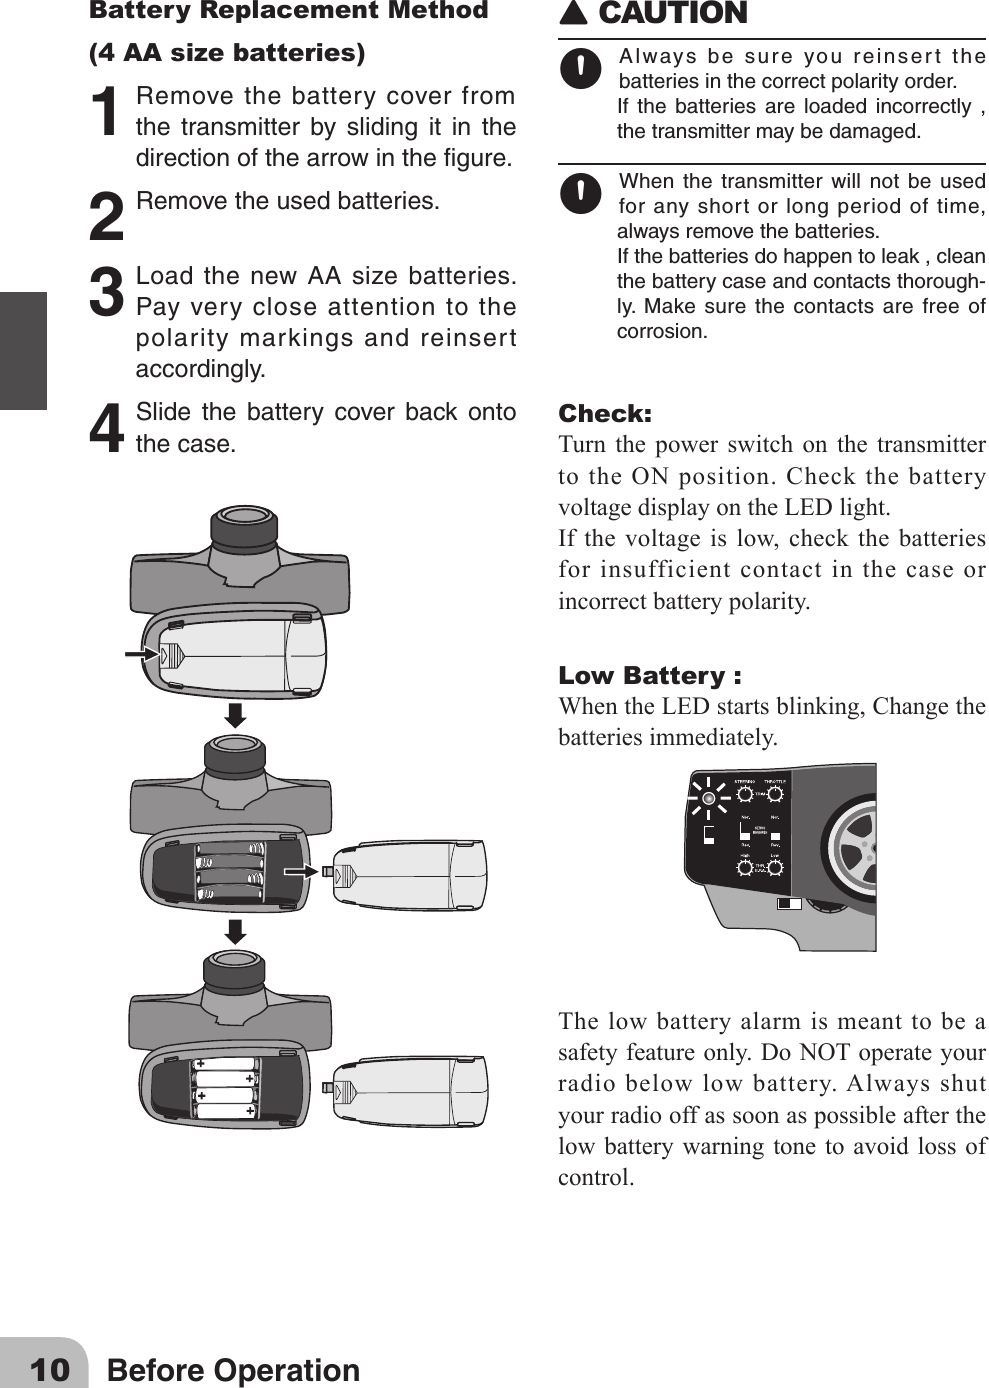 10 Before OperationBattery Replacement Method(4 AA size batteries)1 Removethebatterycoverfromthe transmitter by sliding it in thedirectionofthearrowinthegure.2 Removetheusedbatteries.3 Loadthenew AAsize batteries.Payverycloseattentiontothepolaritymarkingsandreinsertaccordingly.4 Slide the battery cover back ontothecase.󾙈CAUTION 󾙊Alwaysbesureyoureinsertthebatteriesinthecorrectpolarityorder.If the batteries are loaded incorrectly ,thetransmittermaybedamaged.󾙊When the transmitter will not be usedforanyshortorlongperiodoftime,alwaysremovethebatteries.Ifthebatteriesdohappentoleak,cleanthebatterycaseandcontactsthorough-ly. Make surethecontactsarefreeofcorrosion.Check:Turn the power switch on the transmitter to the ON position. Check the battery voltagedisplayontheLEDlight.Ifthe voltageislow,checkthebatteriesfor insufficient contact in the case or incorrect battery polarity. Low Battery :WhentheLEDstartsblinking,Changethebatteries immediately.The low battery alarm is meant to be a safetyfeatureonly.DoNOToperateyourradio below low battery. Always shut your radio off as soon as possible after the low battery warning tone to avoid loss of control.